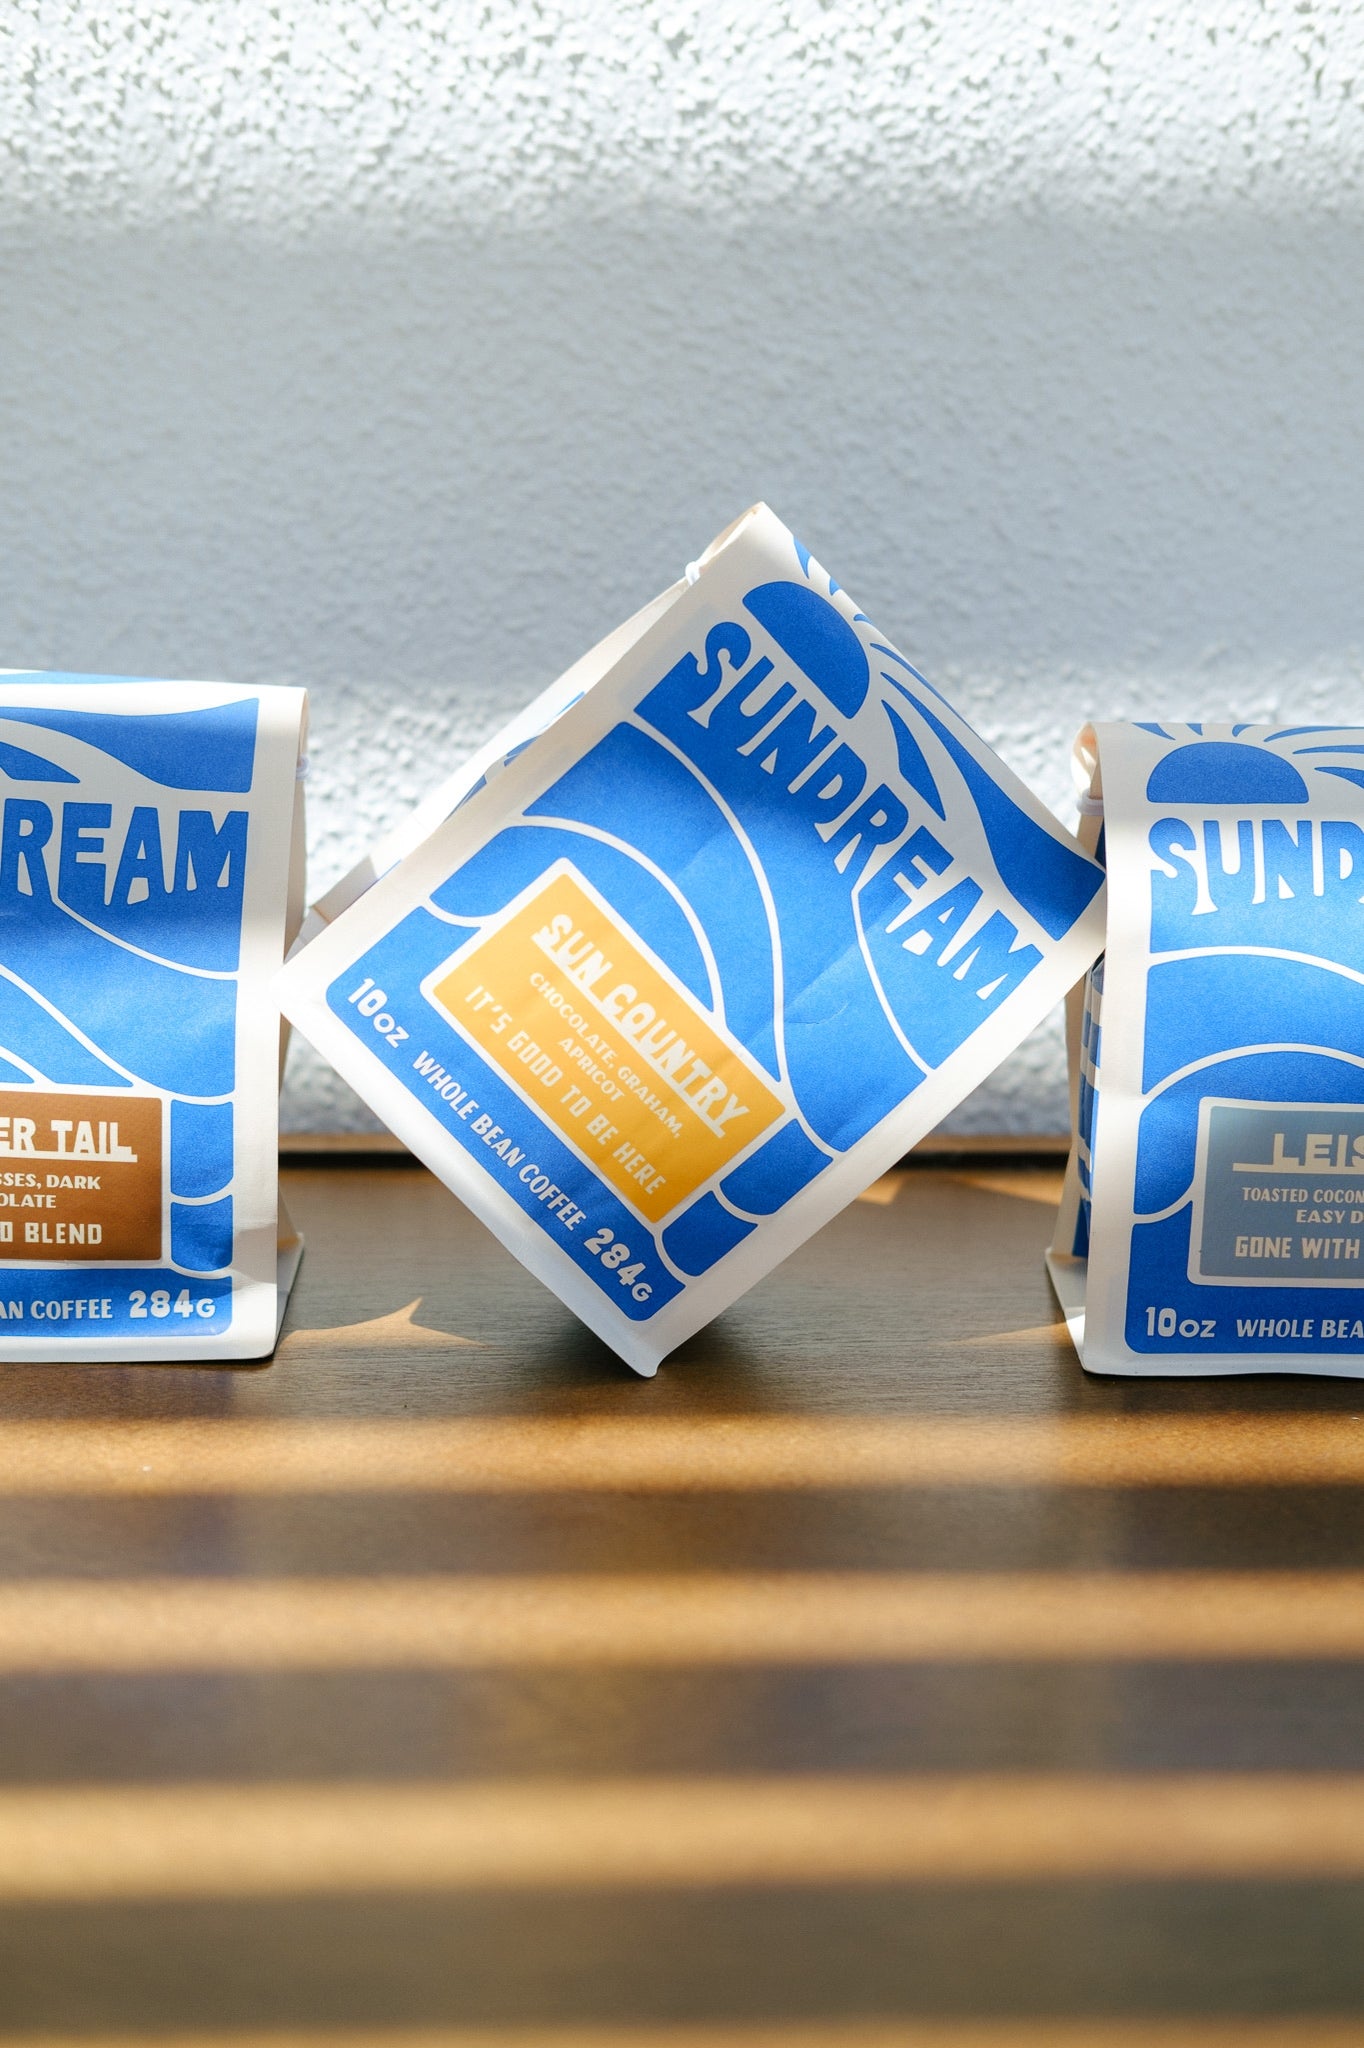 Inspired by our local surf break, the topaz blend has the spirit of an epic beach day in mind. It's classically sweet and undeniably inviting with a creamy milk chocolate-like body with hints of graham and a bright stone fruit finish.